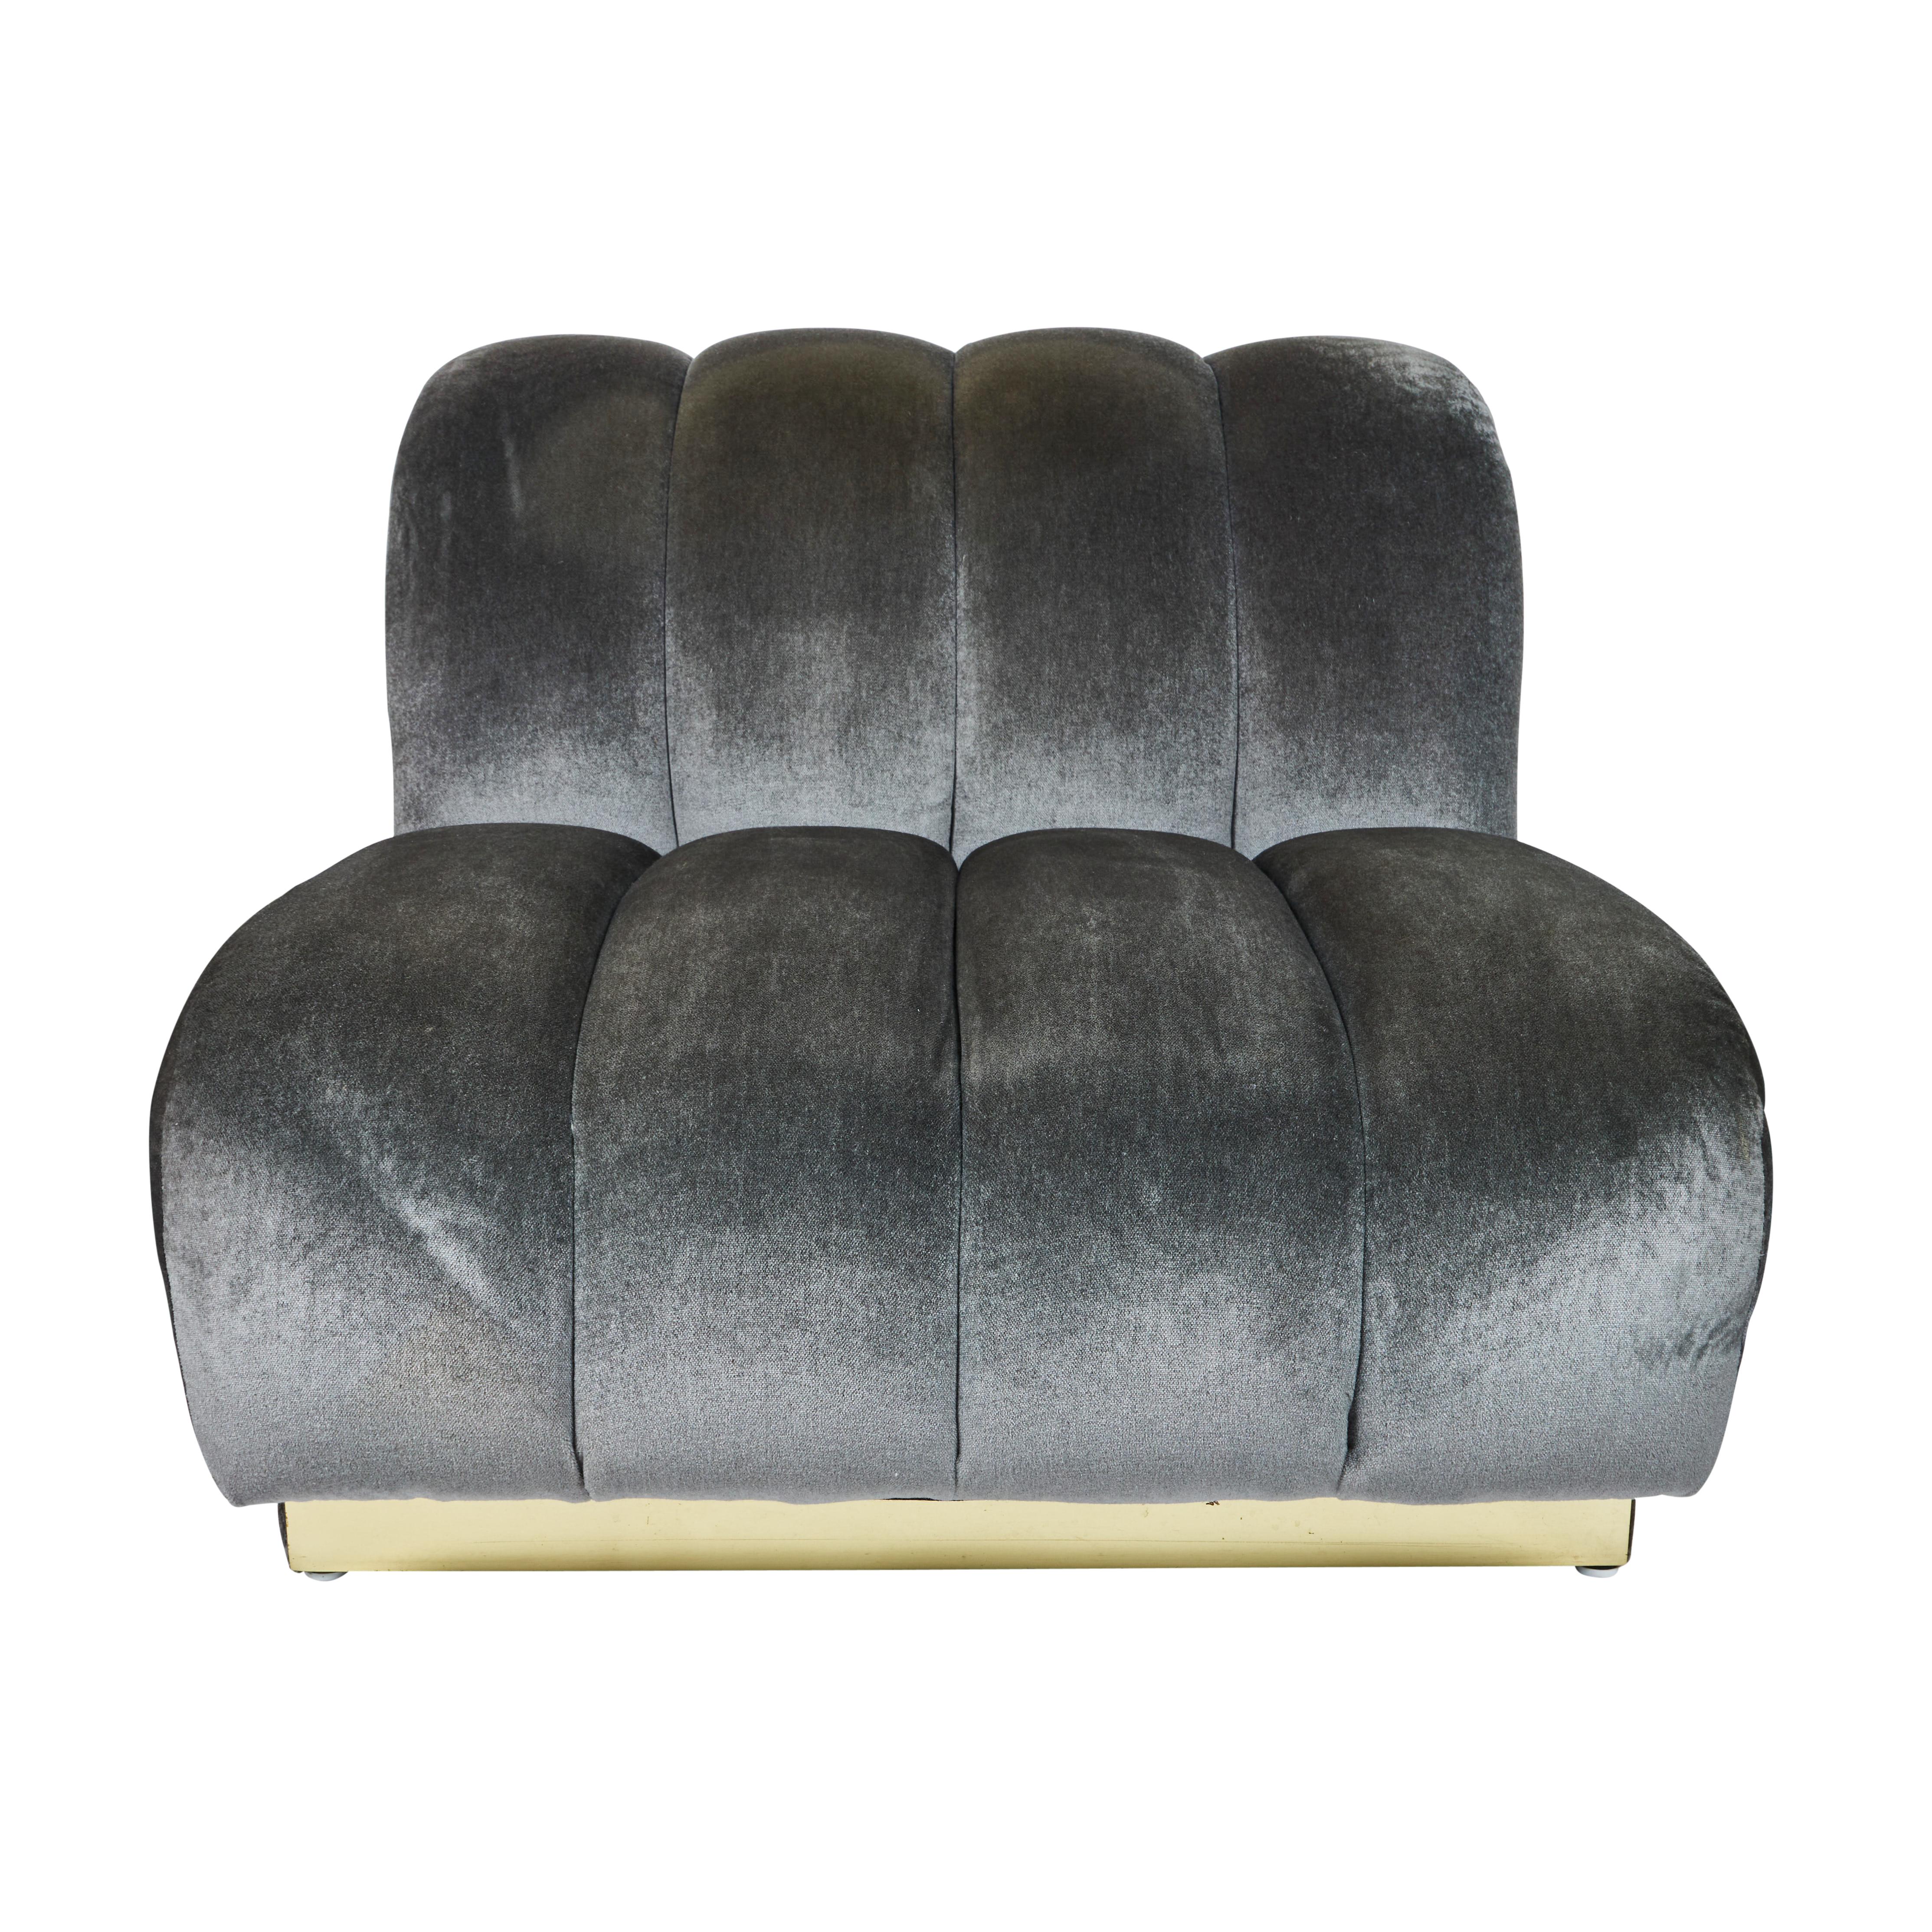 Late 20th Century Pair of Channel Tufted Lounge Chairs by Steve Chase For Sale